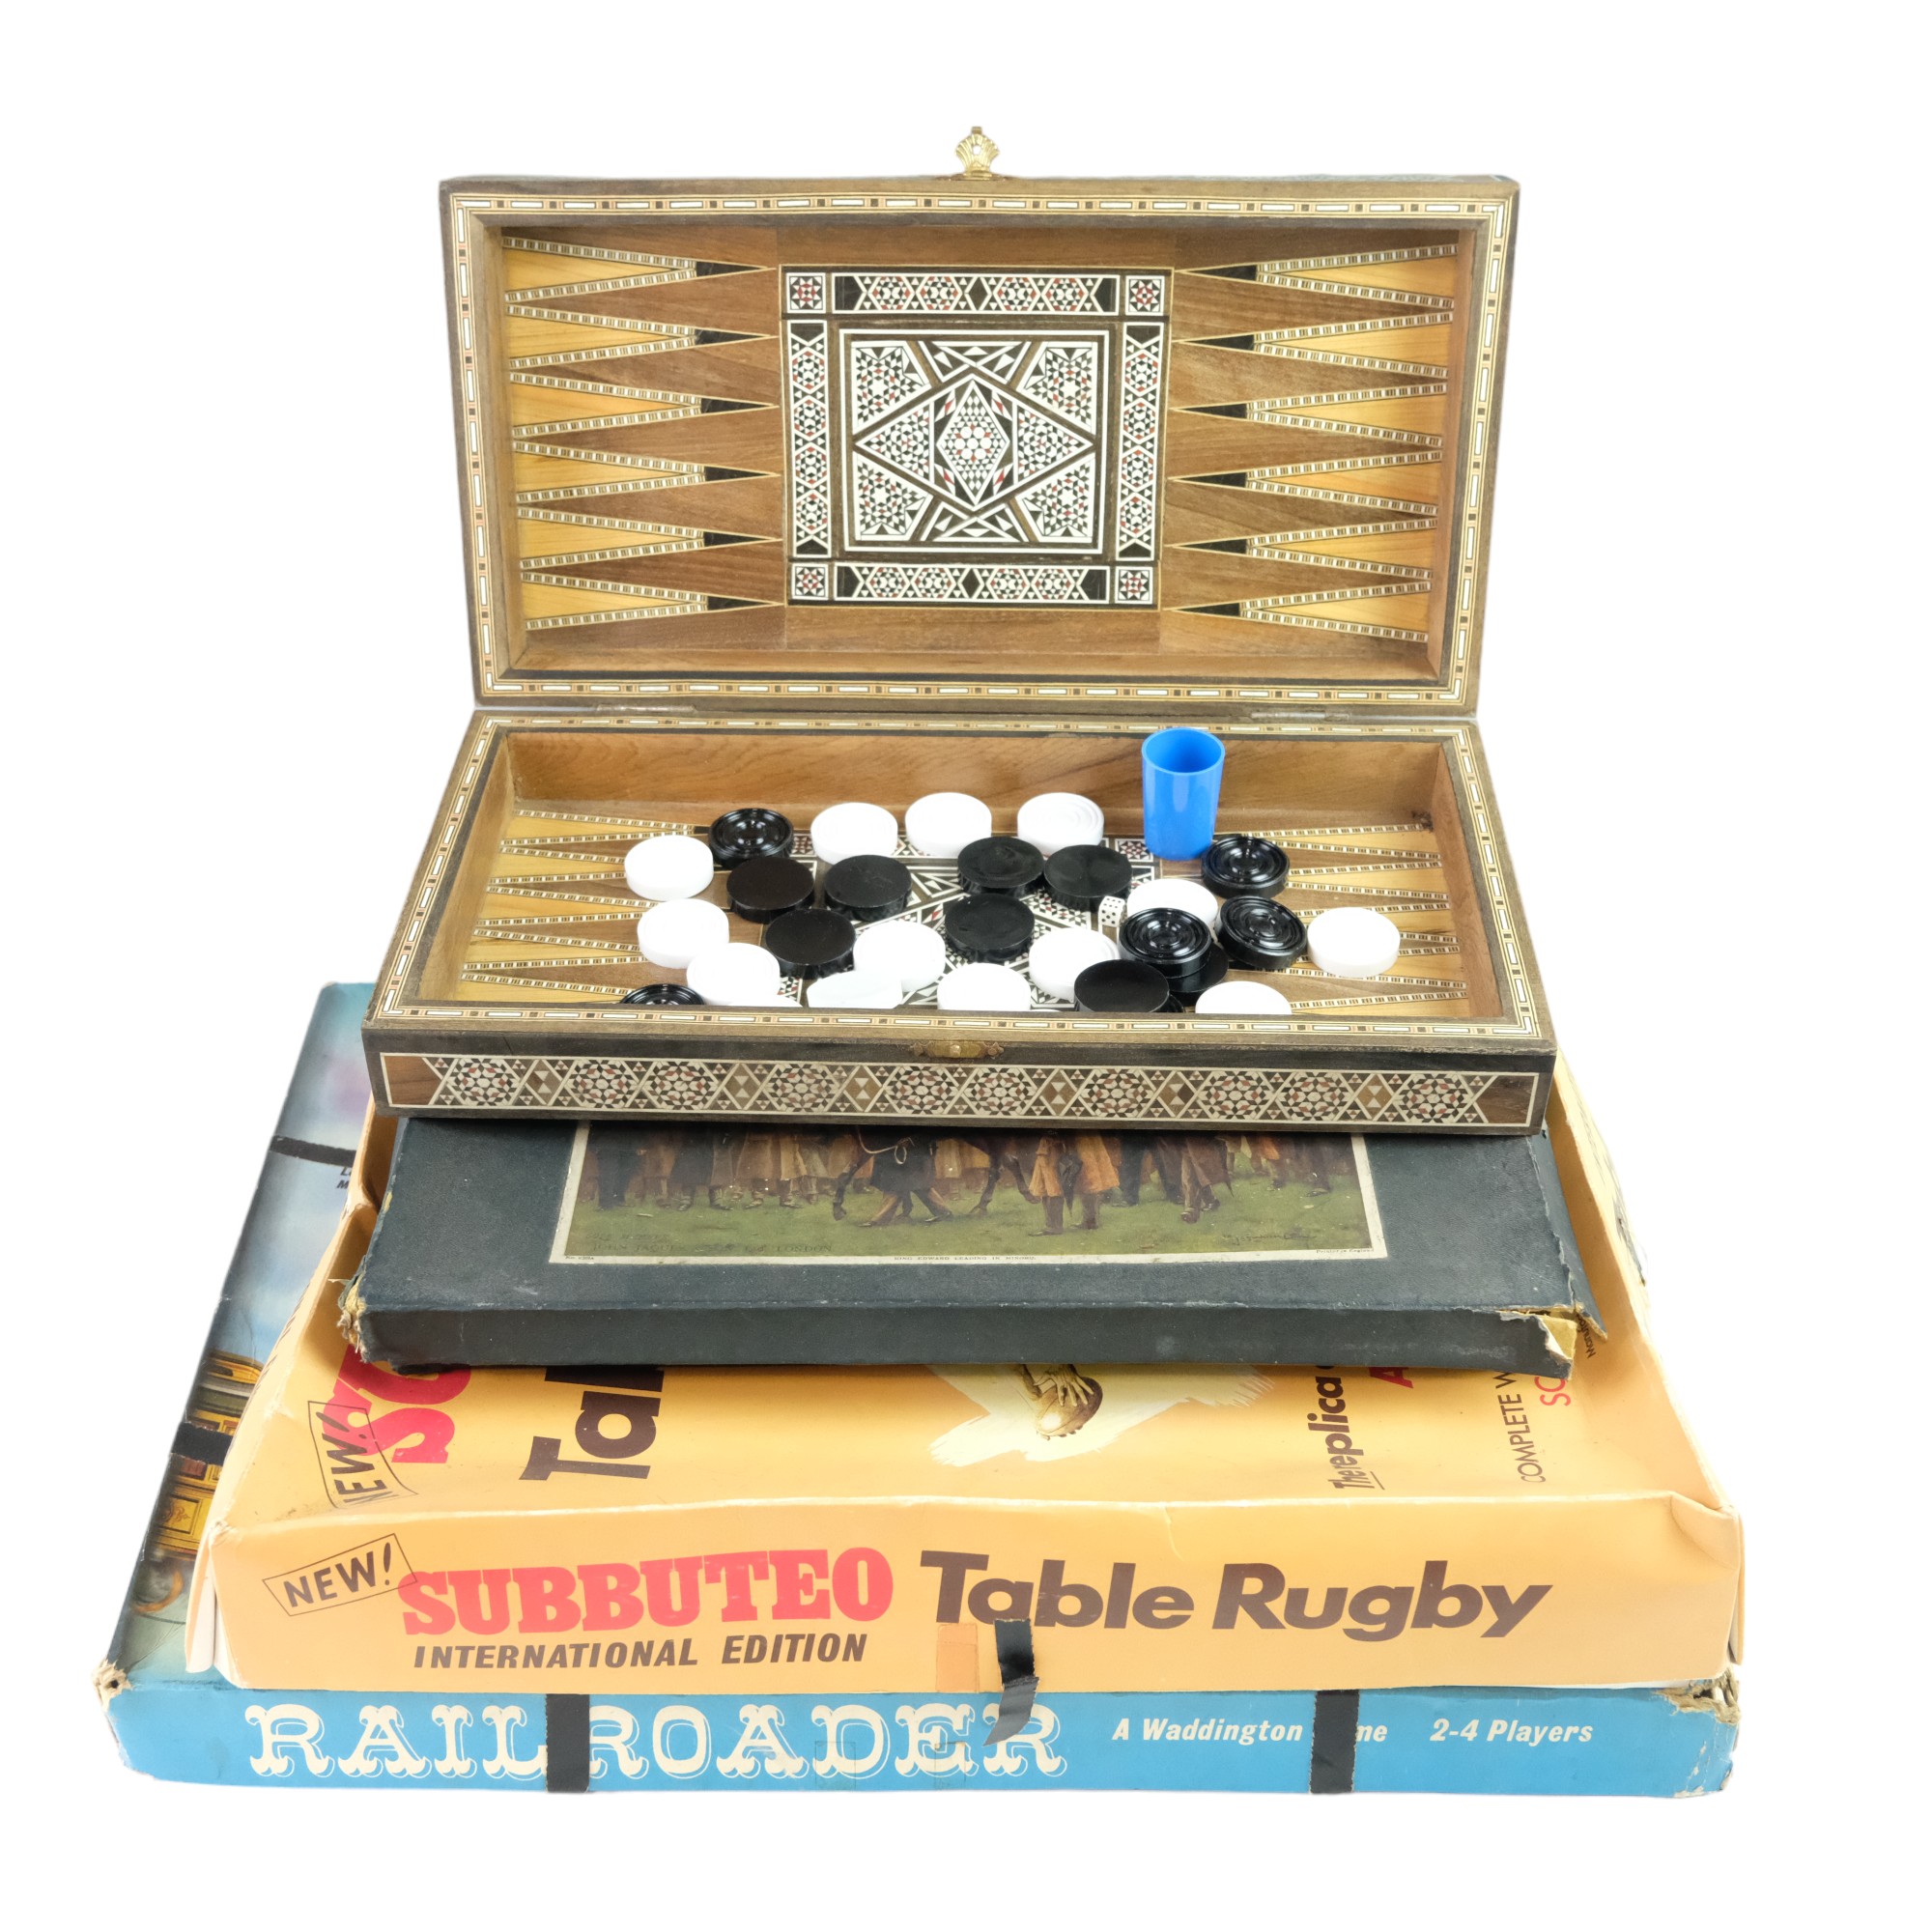 Four vintage board games including Subbuteo Table Rugby, Minoru and Railroader